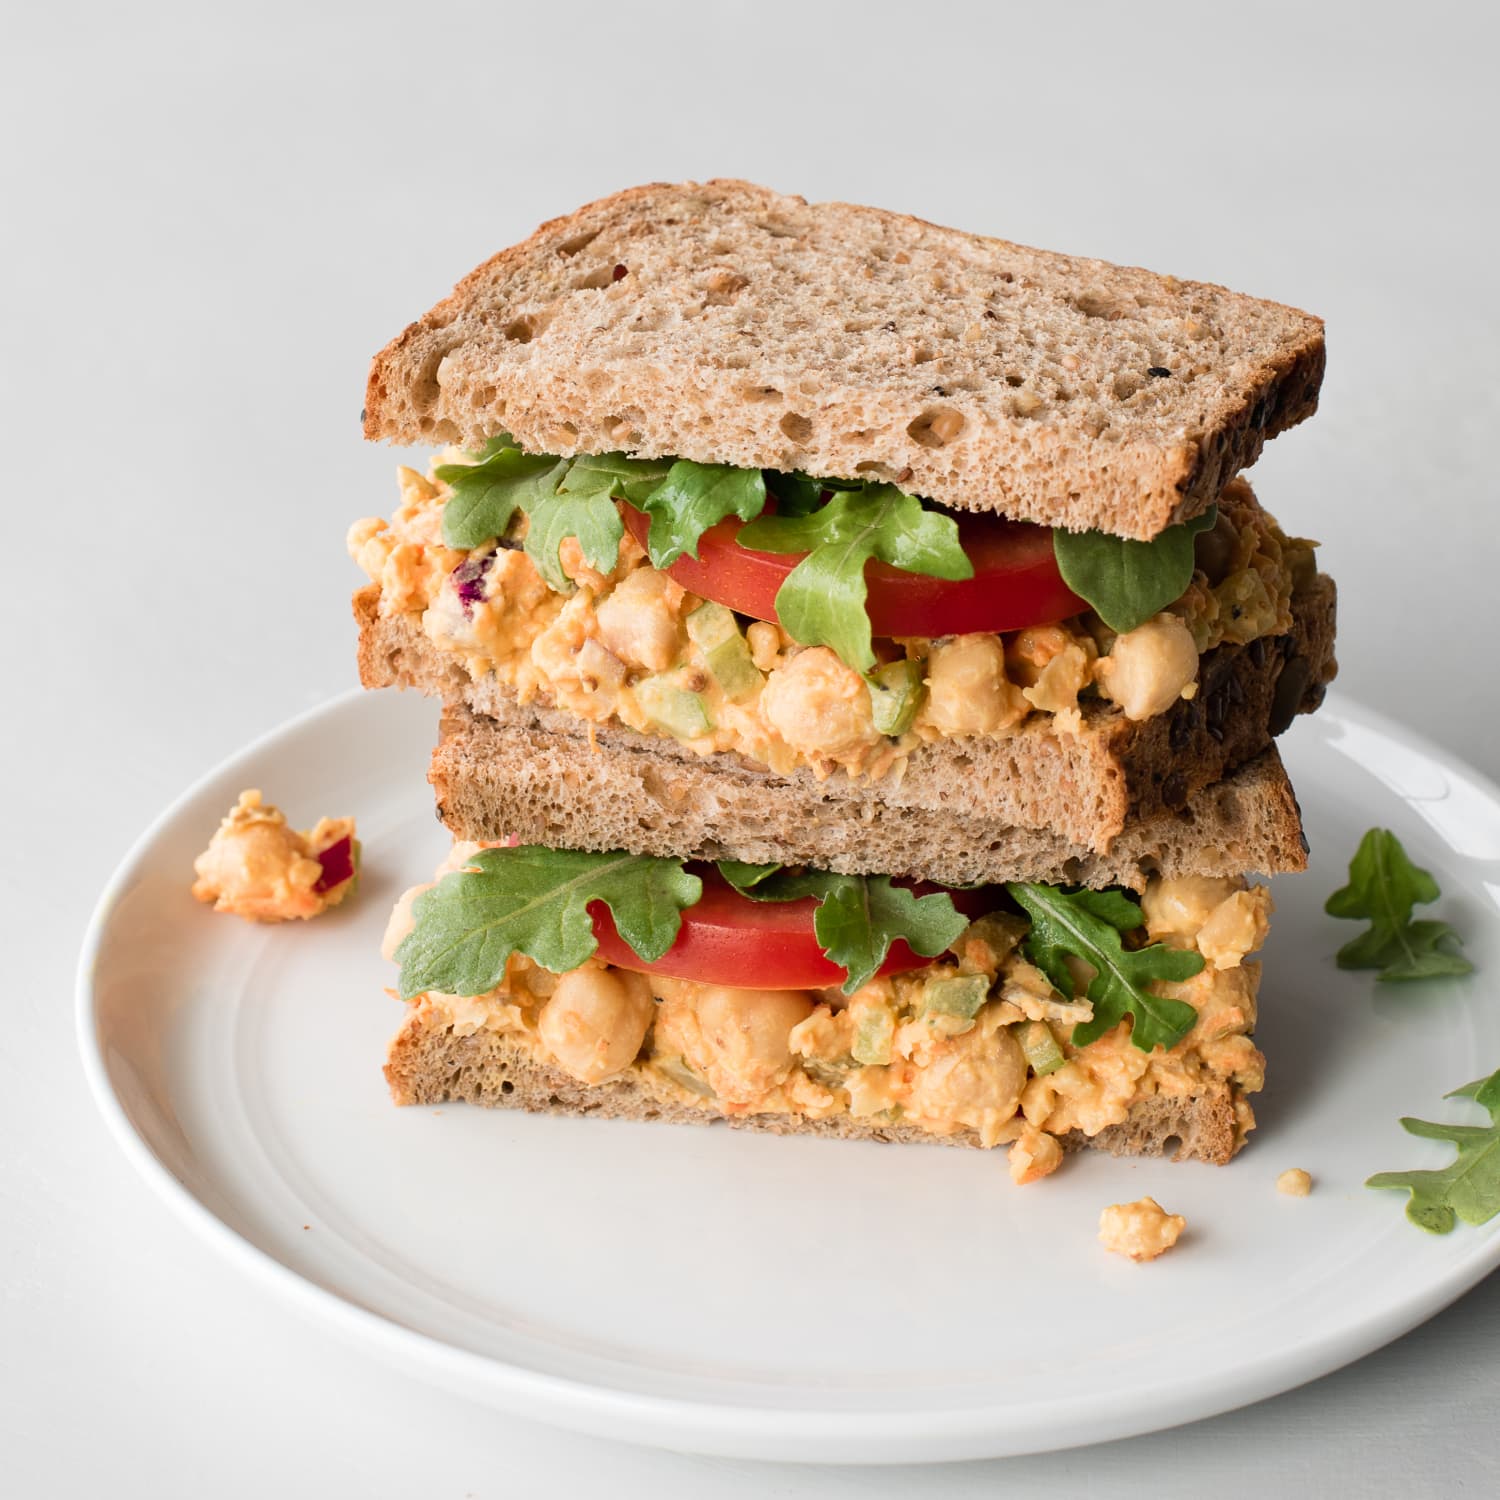 10 Sandwich-Free Lunch Ideas for Kids and Grownups